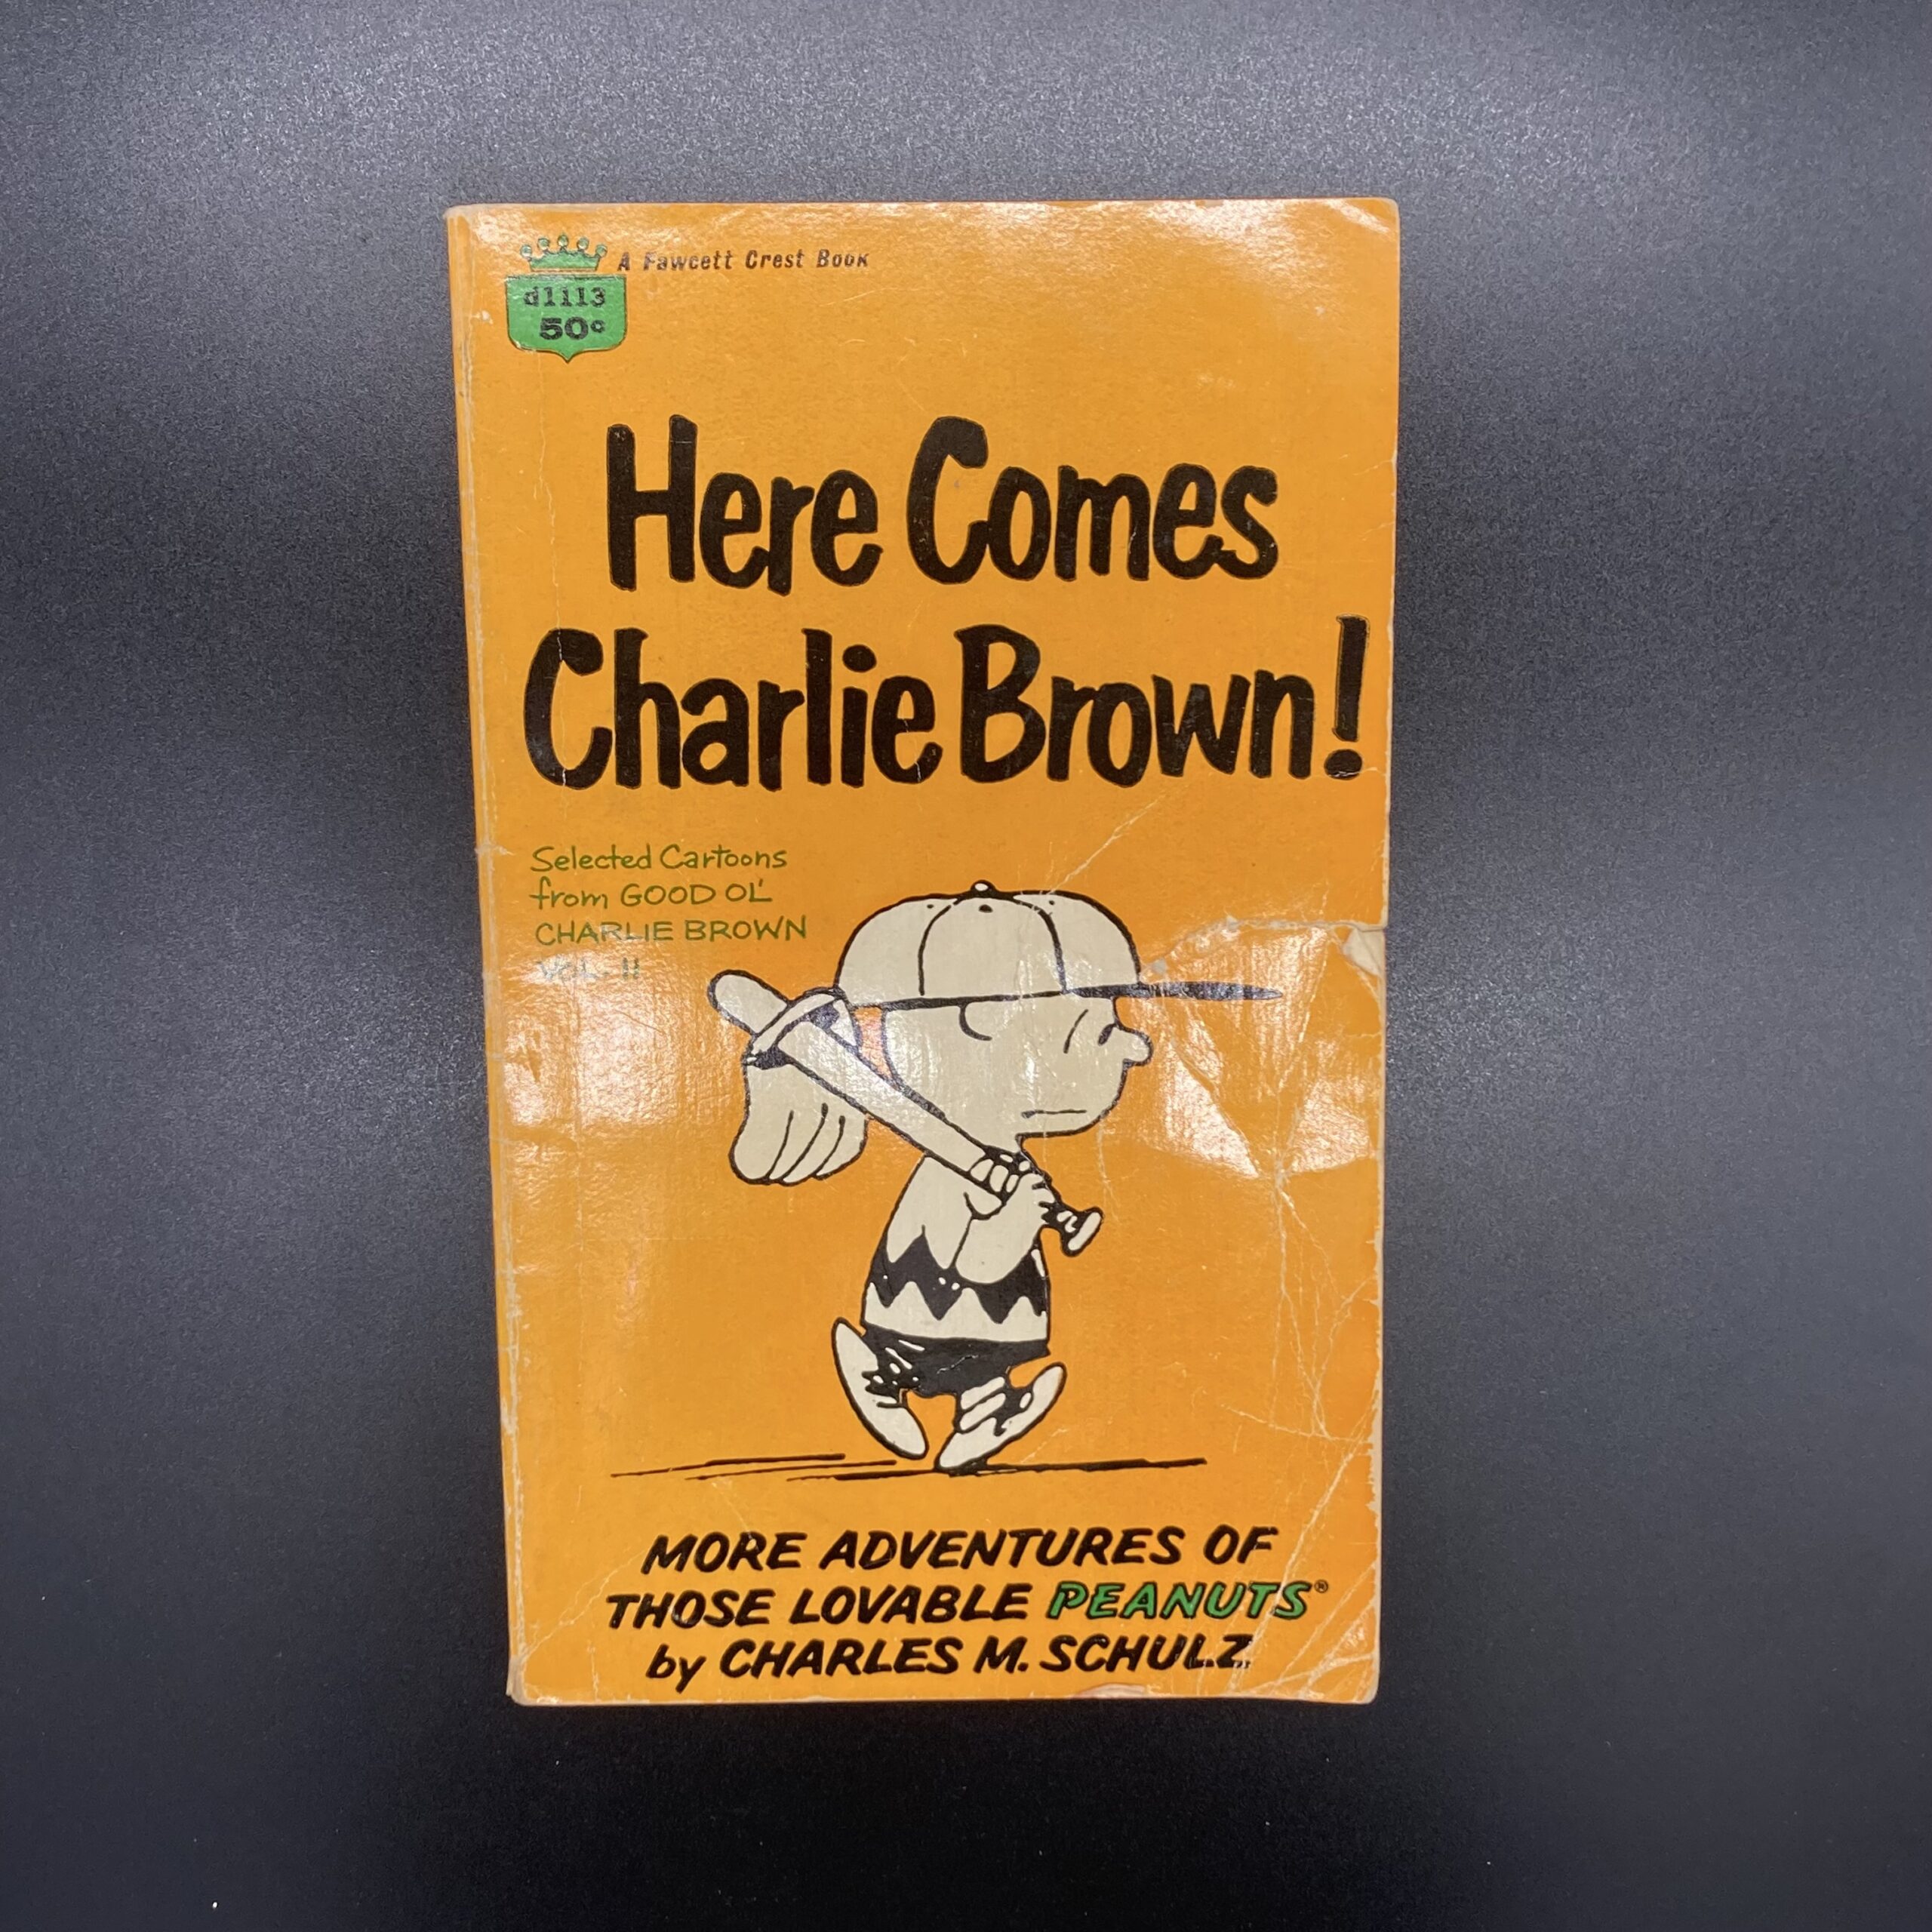 50-60s PEANUTS「Here Comes Charlie Brown!」絵本 チャーリーブラウン